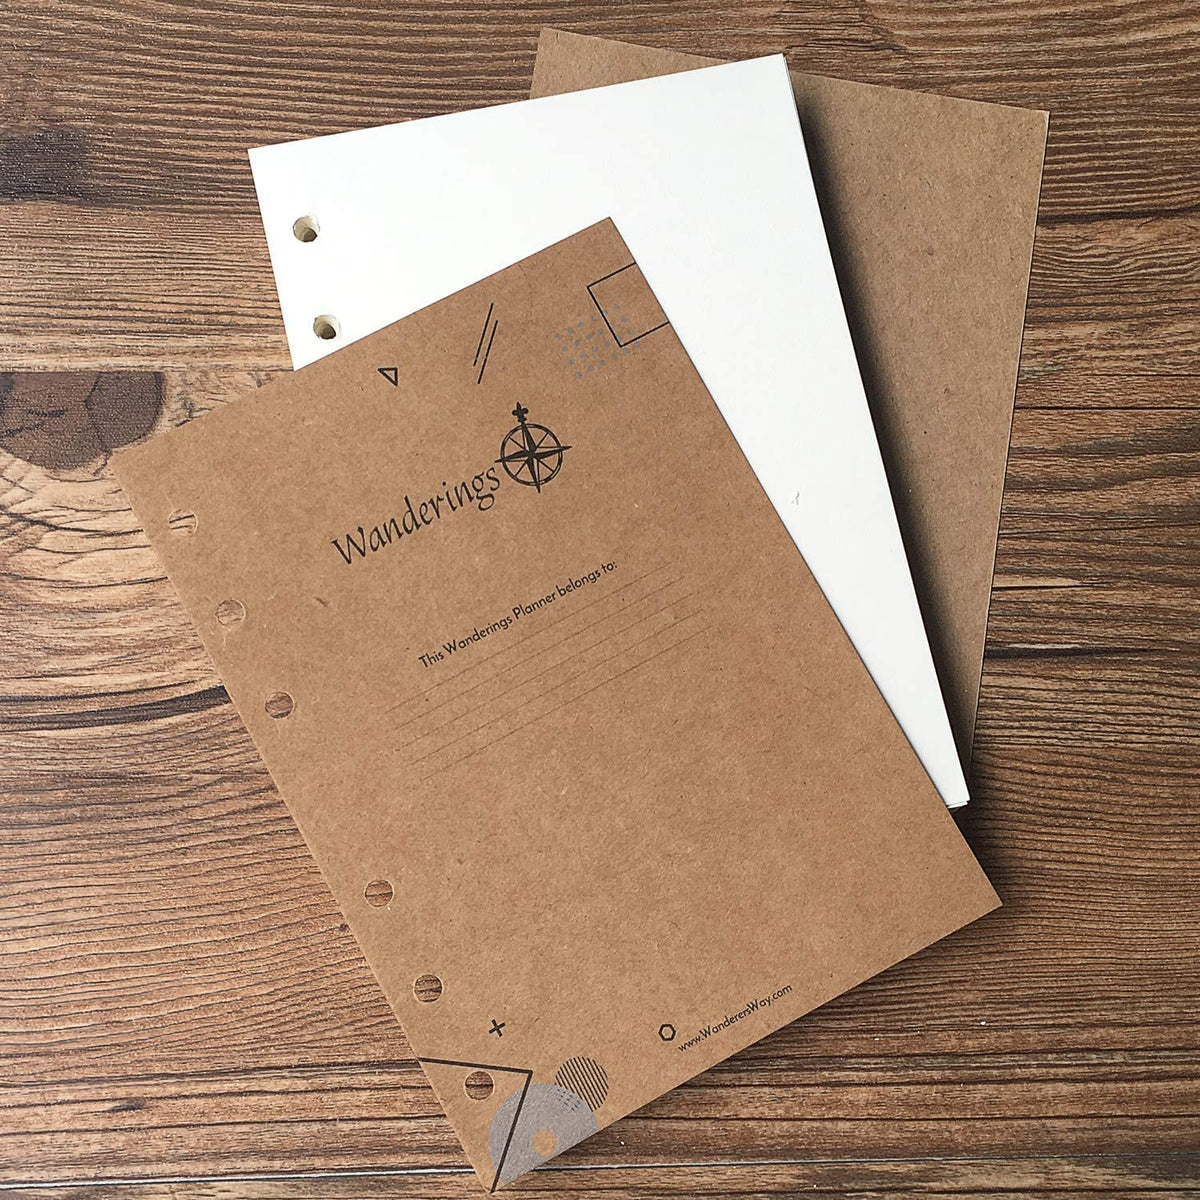 A6 Size Daily Task List and Planner Insert, for 6-ring A6 Binders (4.1 x  5.8”). THIS IS A EUROPEAN STANDARD A6 SIZE. YOUR A6 MAY BE DIFFERENT.  PLEASE